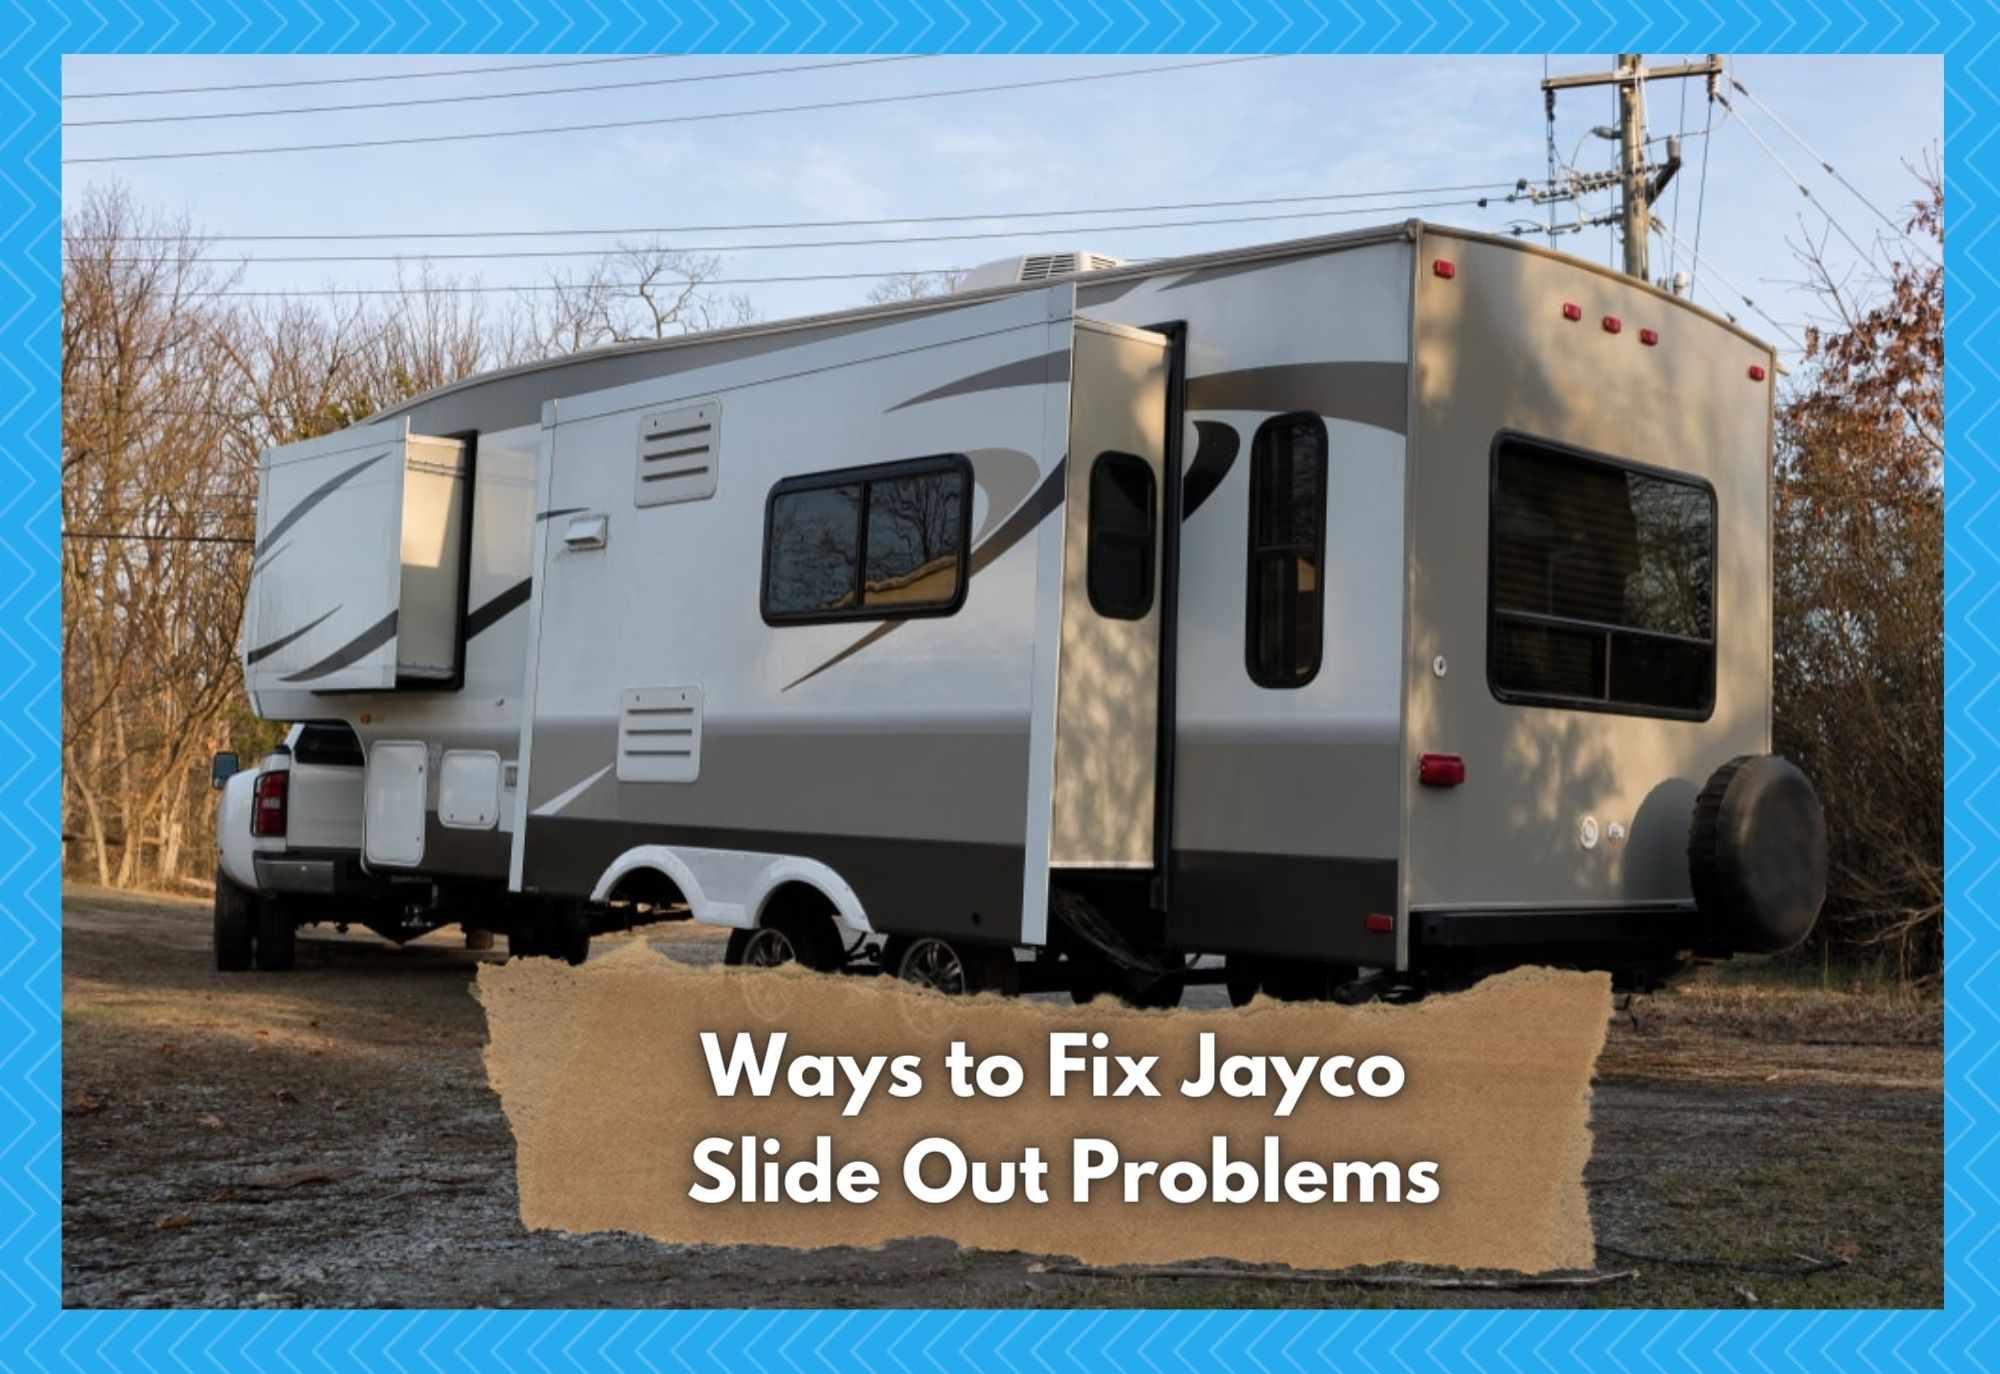 jayco slide out problems